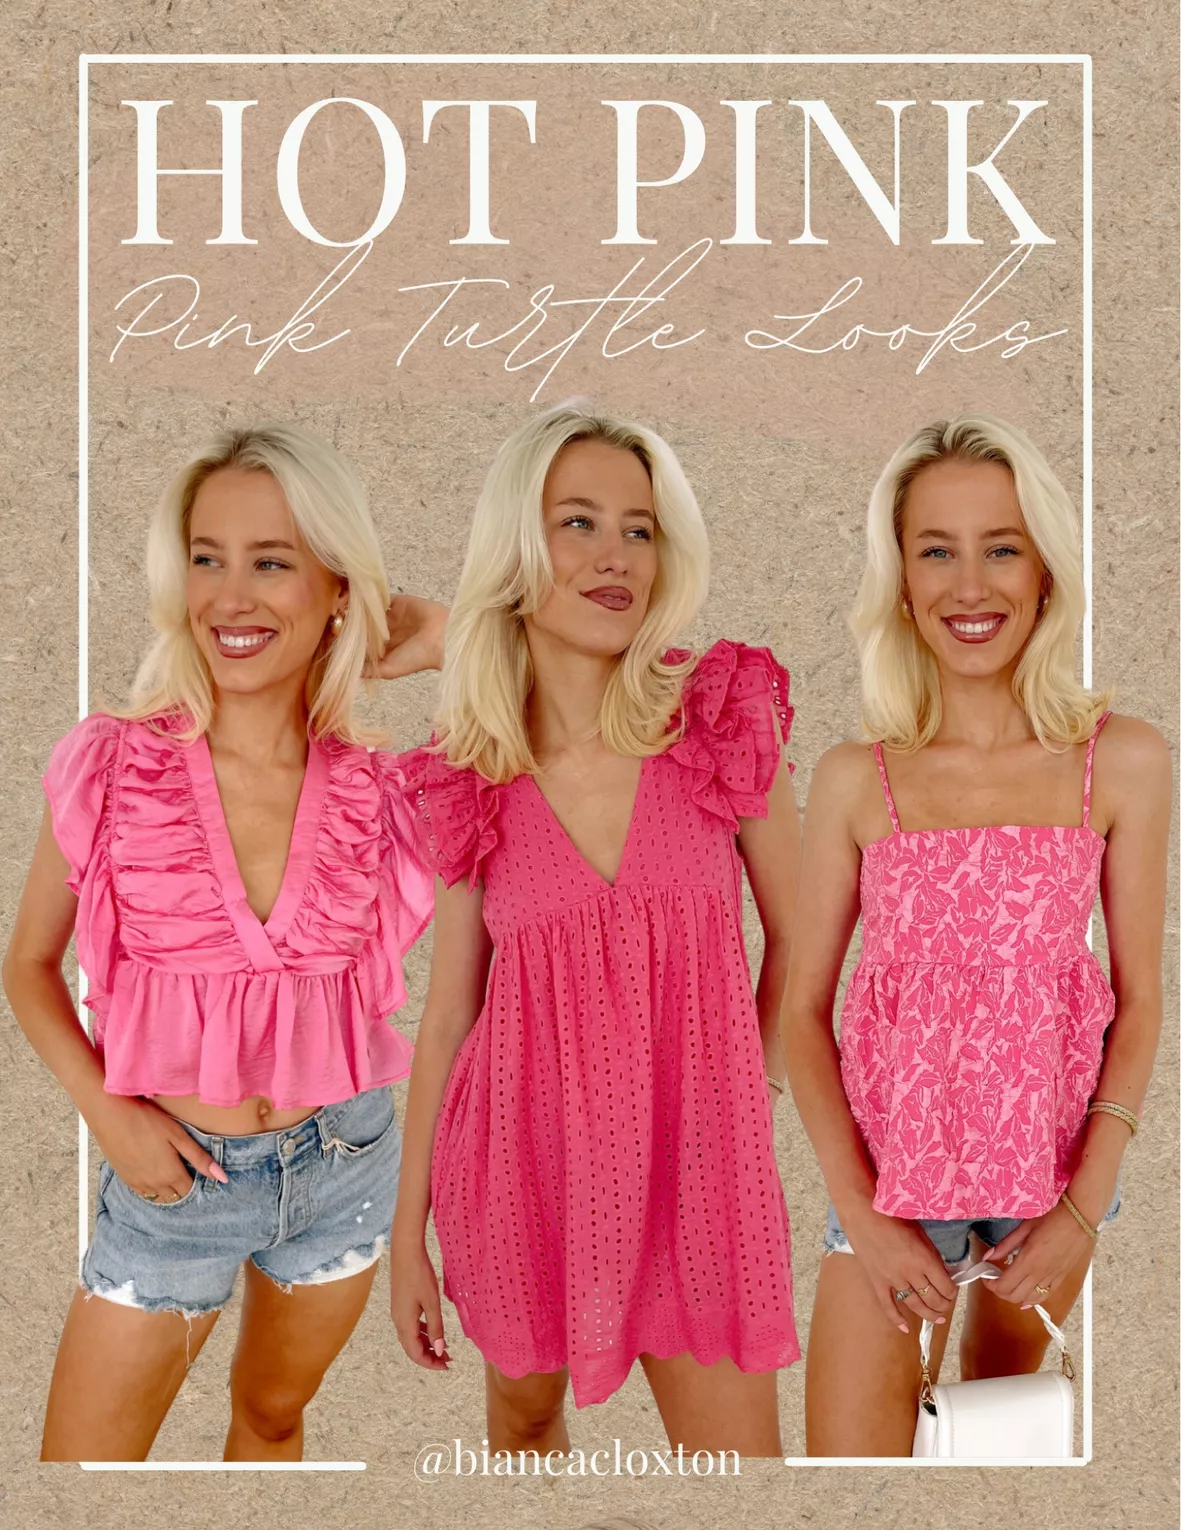 Hot Pink Suit Summer Outfits For Women (2 ideas & outfits)